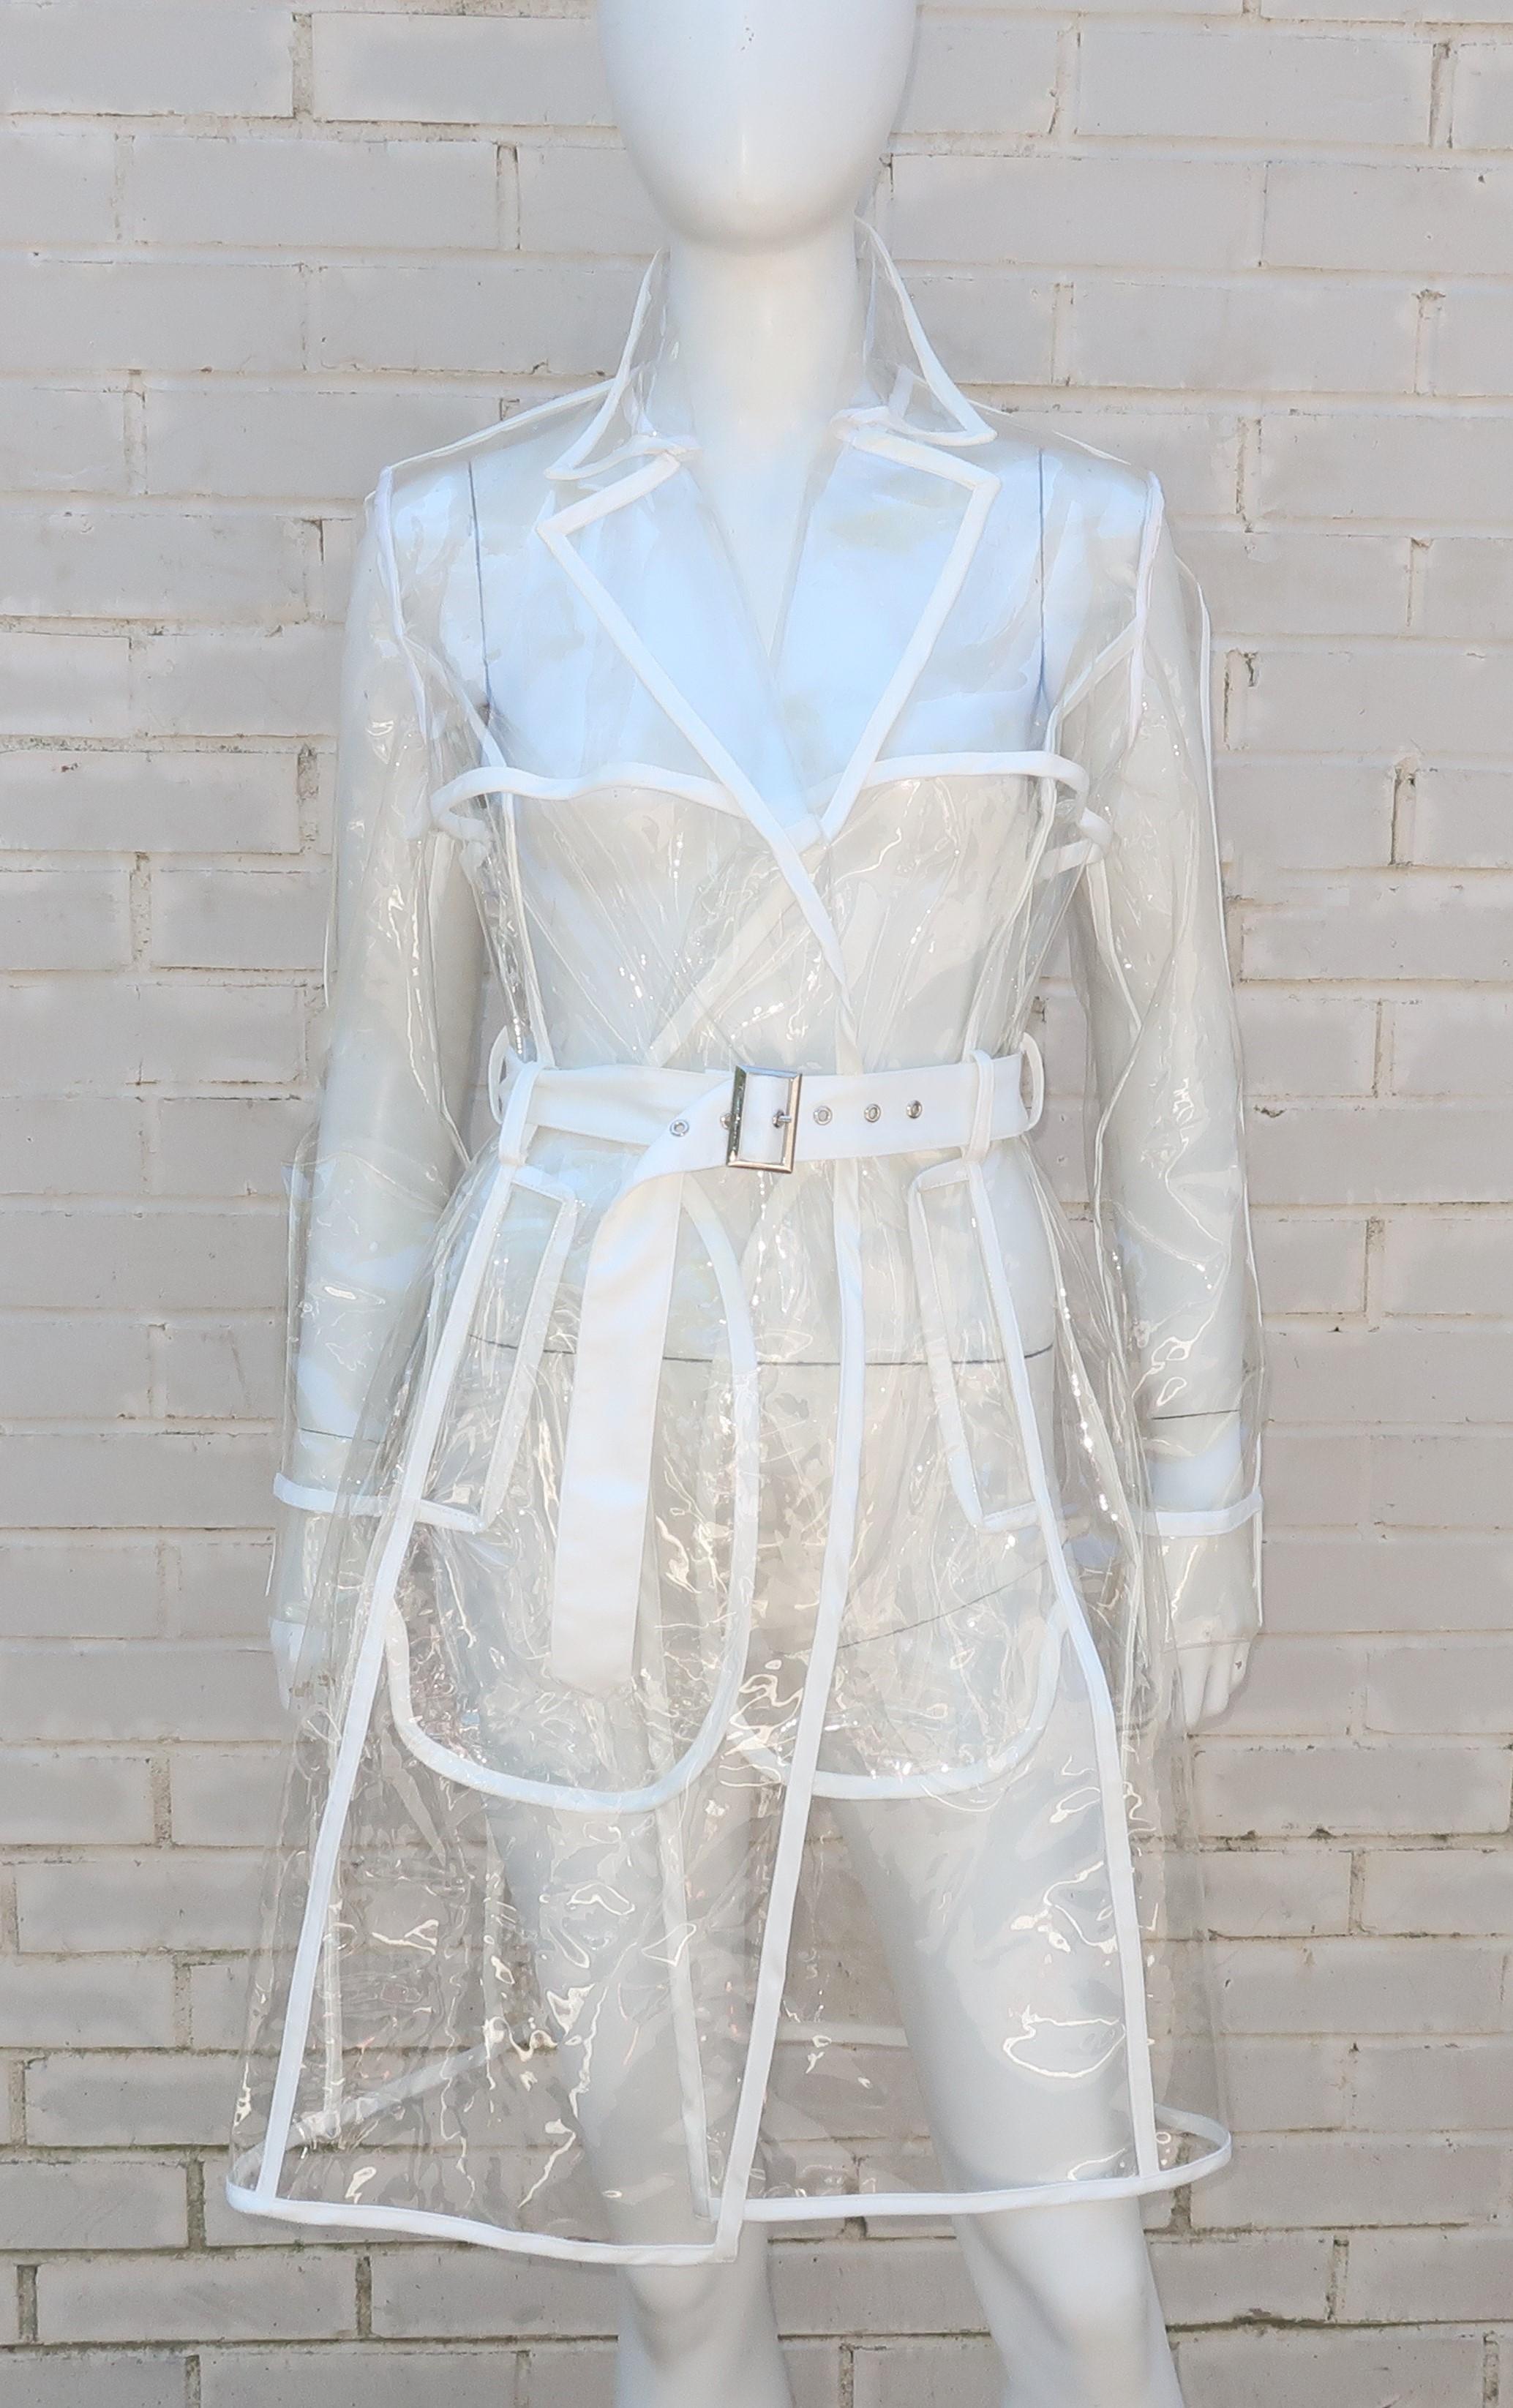 This one is just for fun!  A great mix of classic trench coat styling and a nod to the space age looks of the 1960's ... this clear vinyl raincoat with white satin piping has it all.  Made for Mistress Rocks in Los Angeles and acquired from the